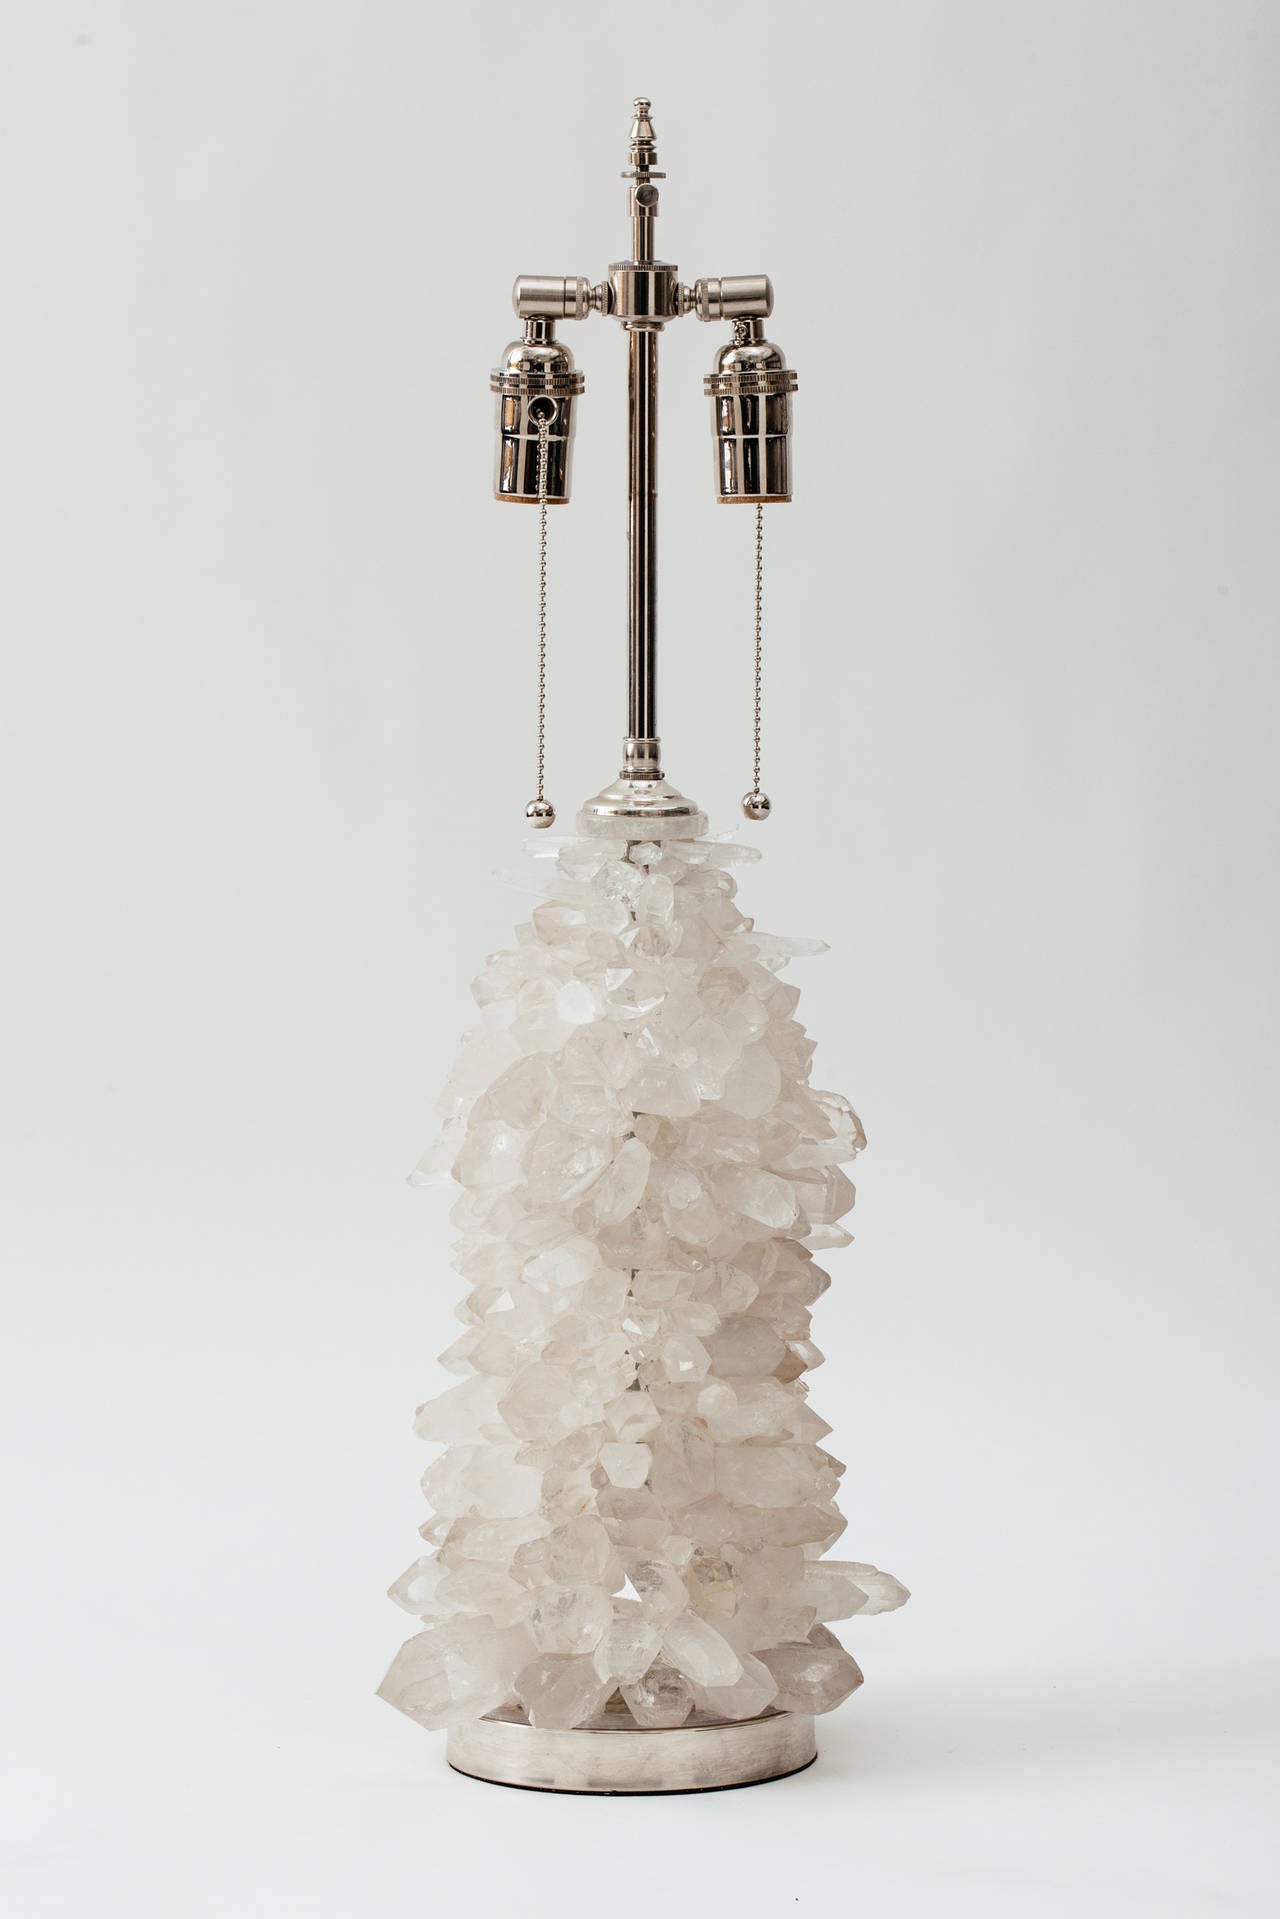 Handcrafted rock crystal cluster lamp with nickel-plated solid brass base and hardware. Double socketed with pull chain switches. 
100 max wattage per socket. Lamp body measures 15 inches height, 
Lamp shade not included.
